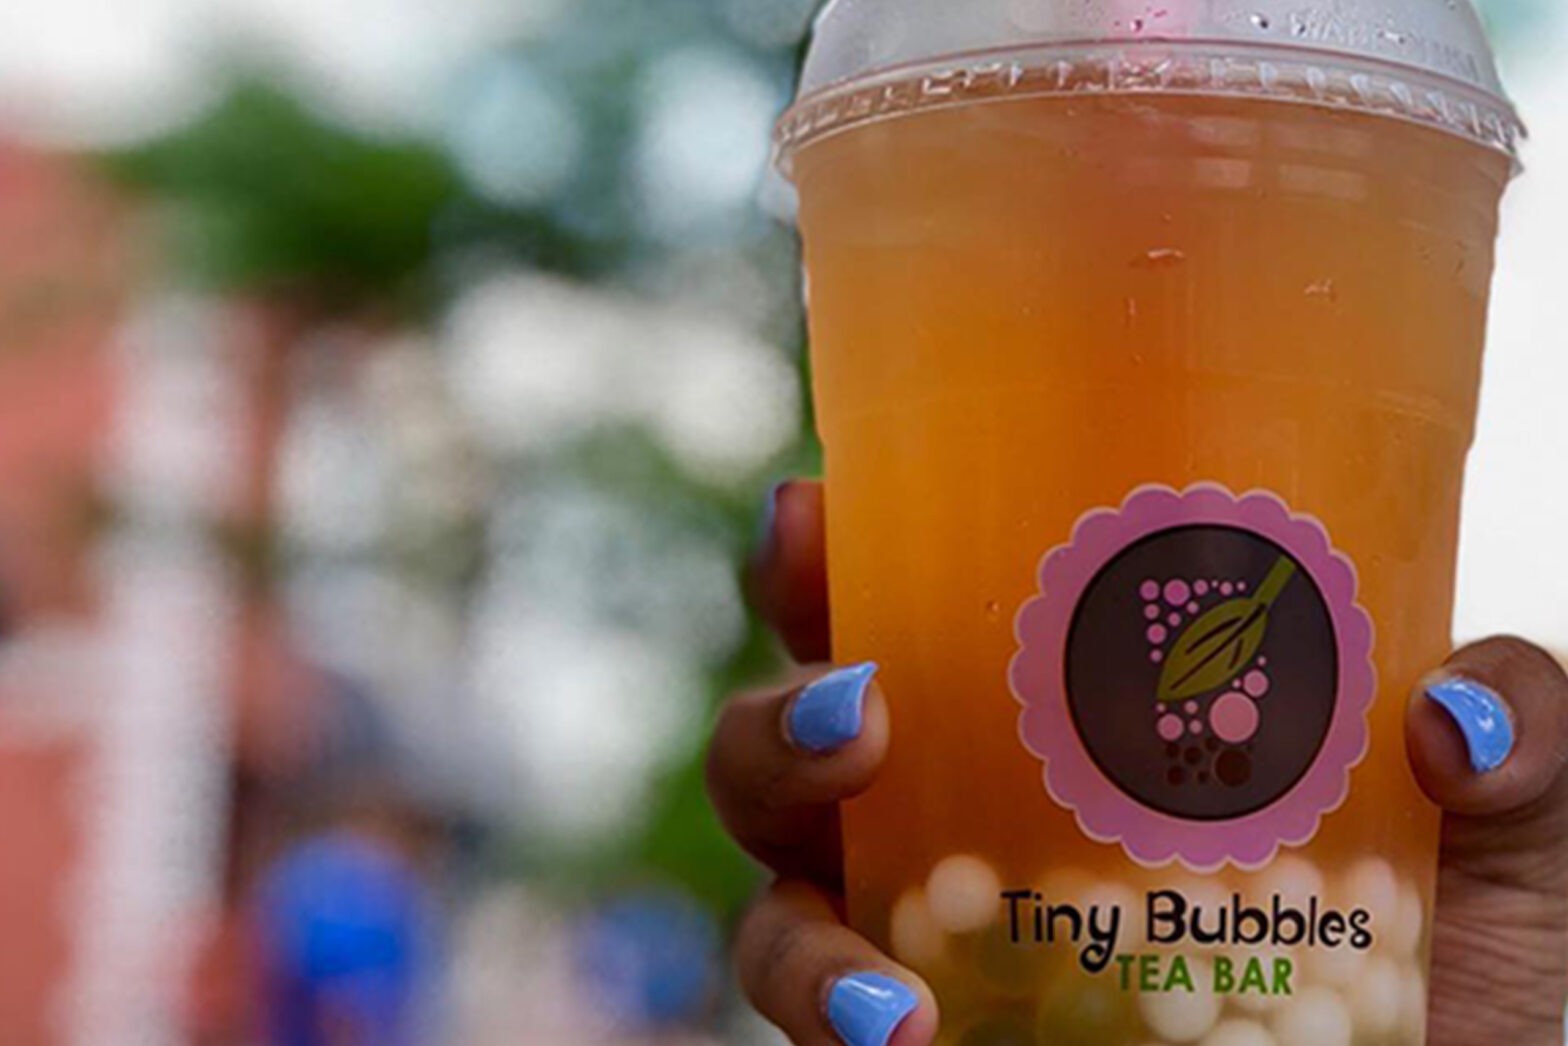 Tiny Bubbles Tea Bar Explore a Variety of Flavors near Cheap Eating Places and Local Food Halls.